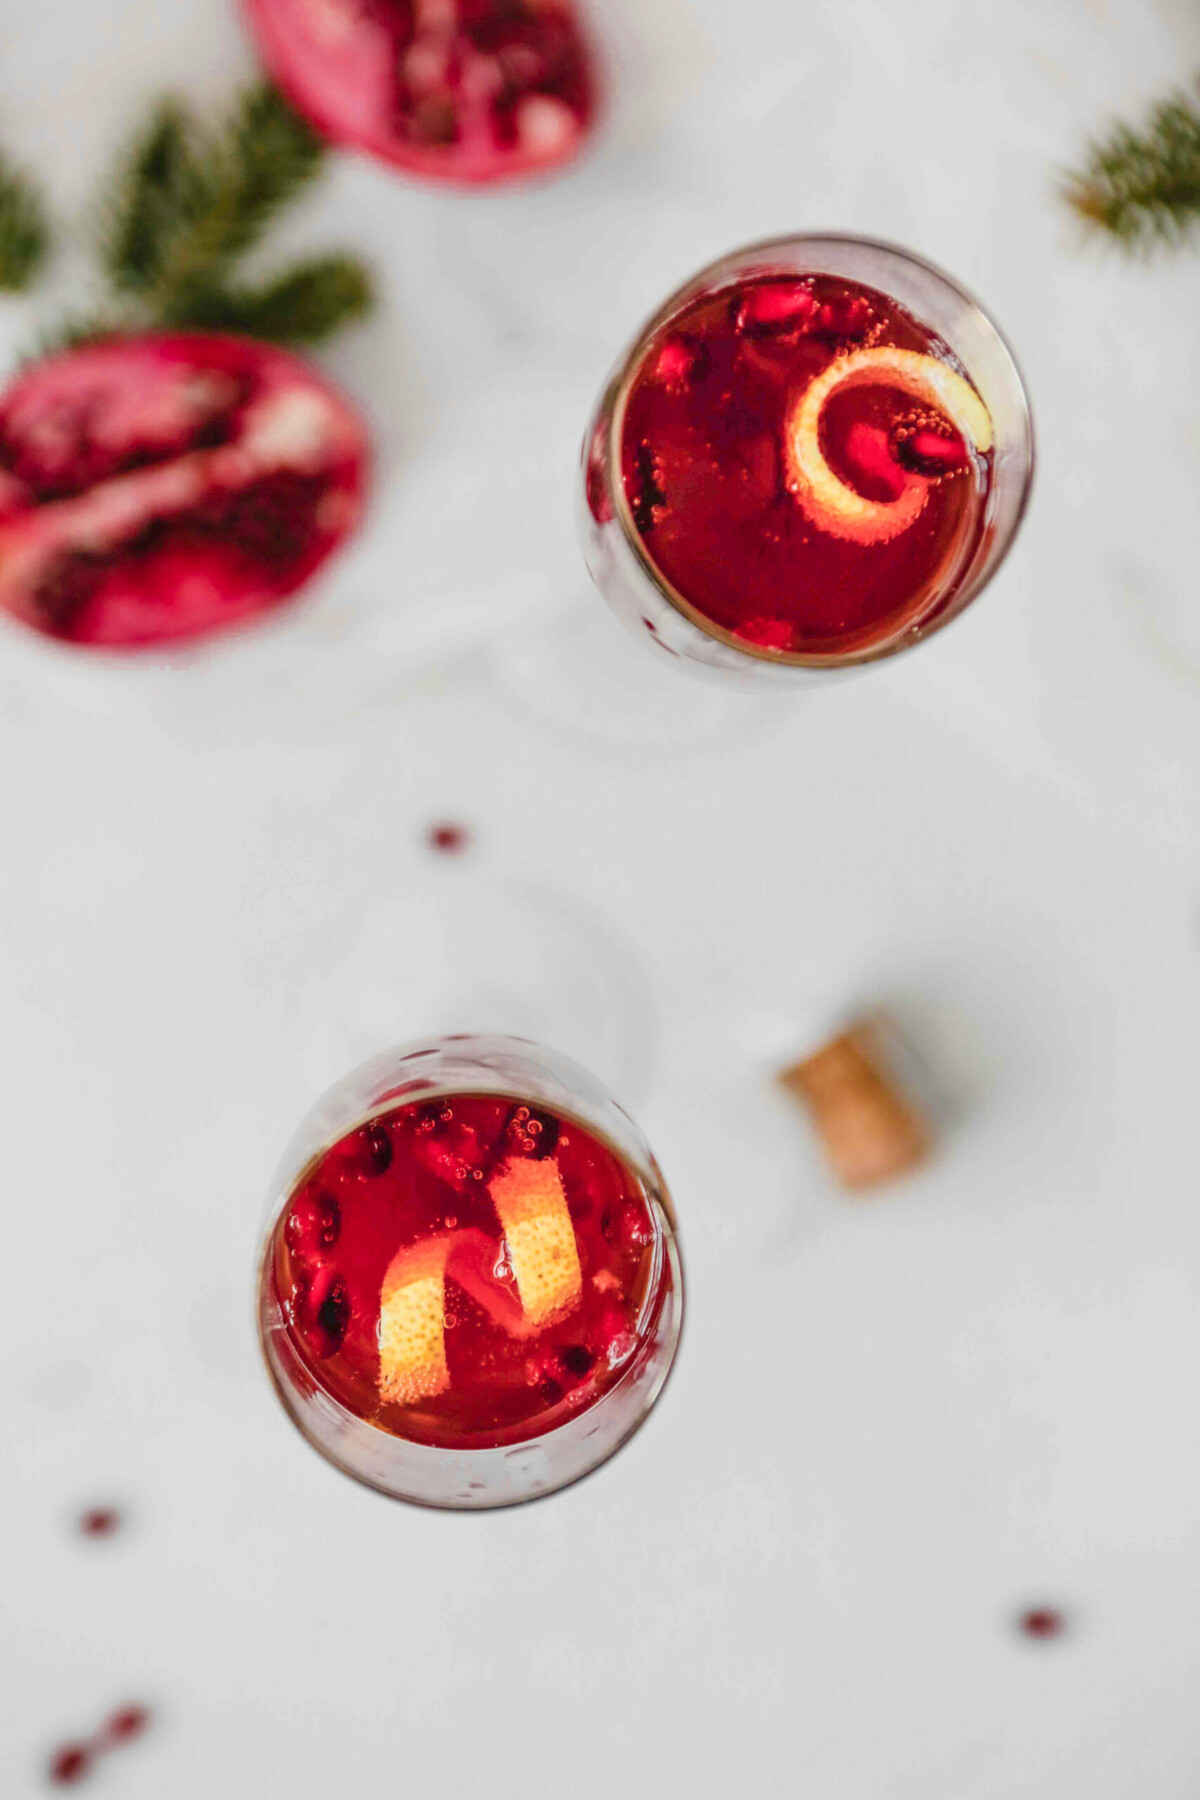 Photograph of pomegranate kir royale cocktail on a white table with holiday decorations in background